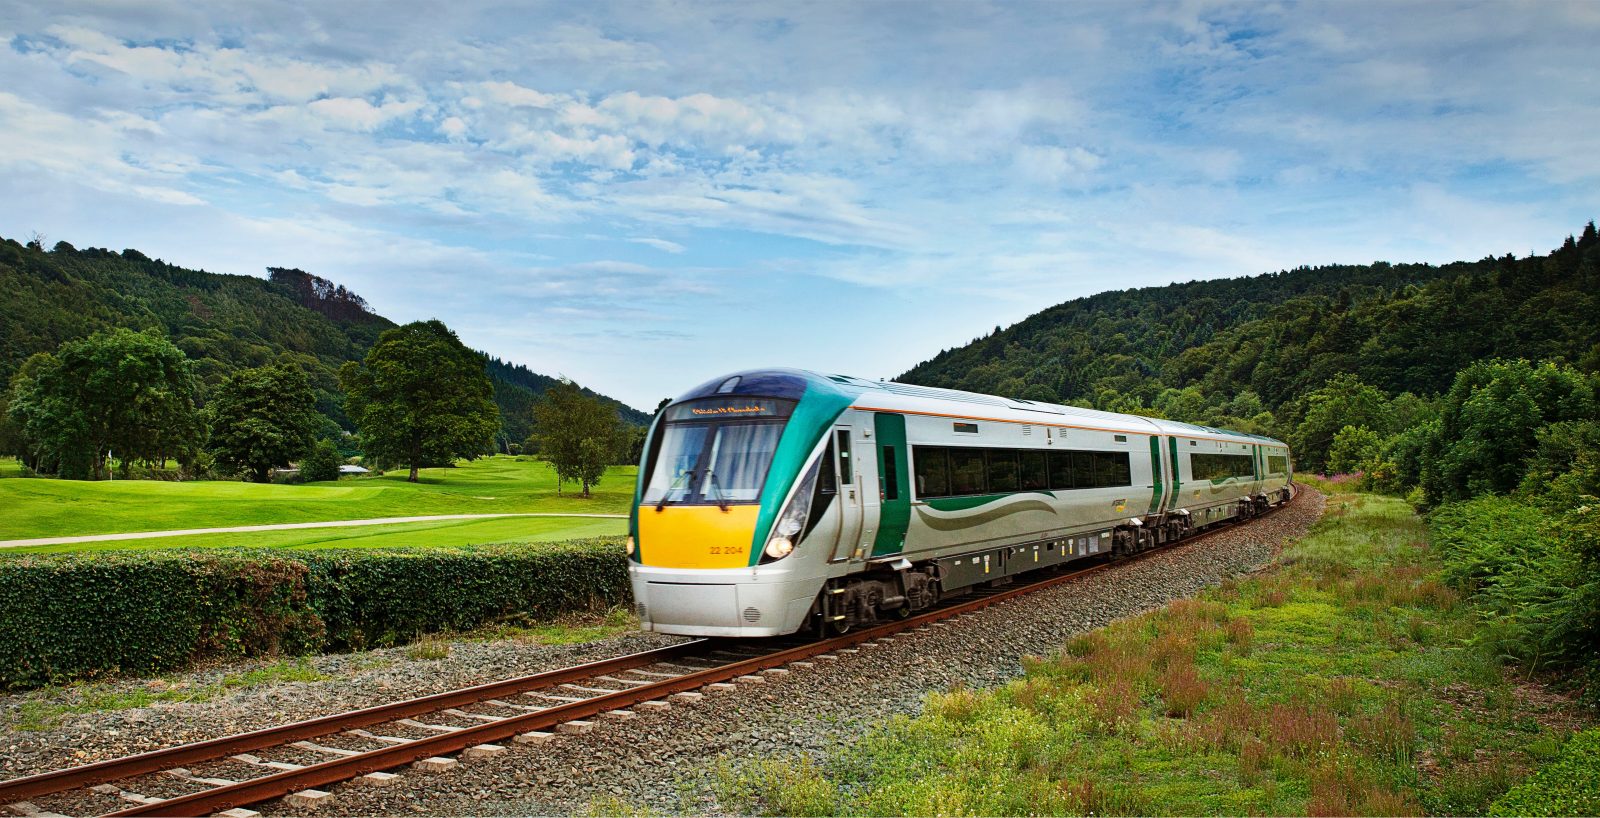 Ireland is looking to add 600 electric trains